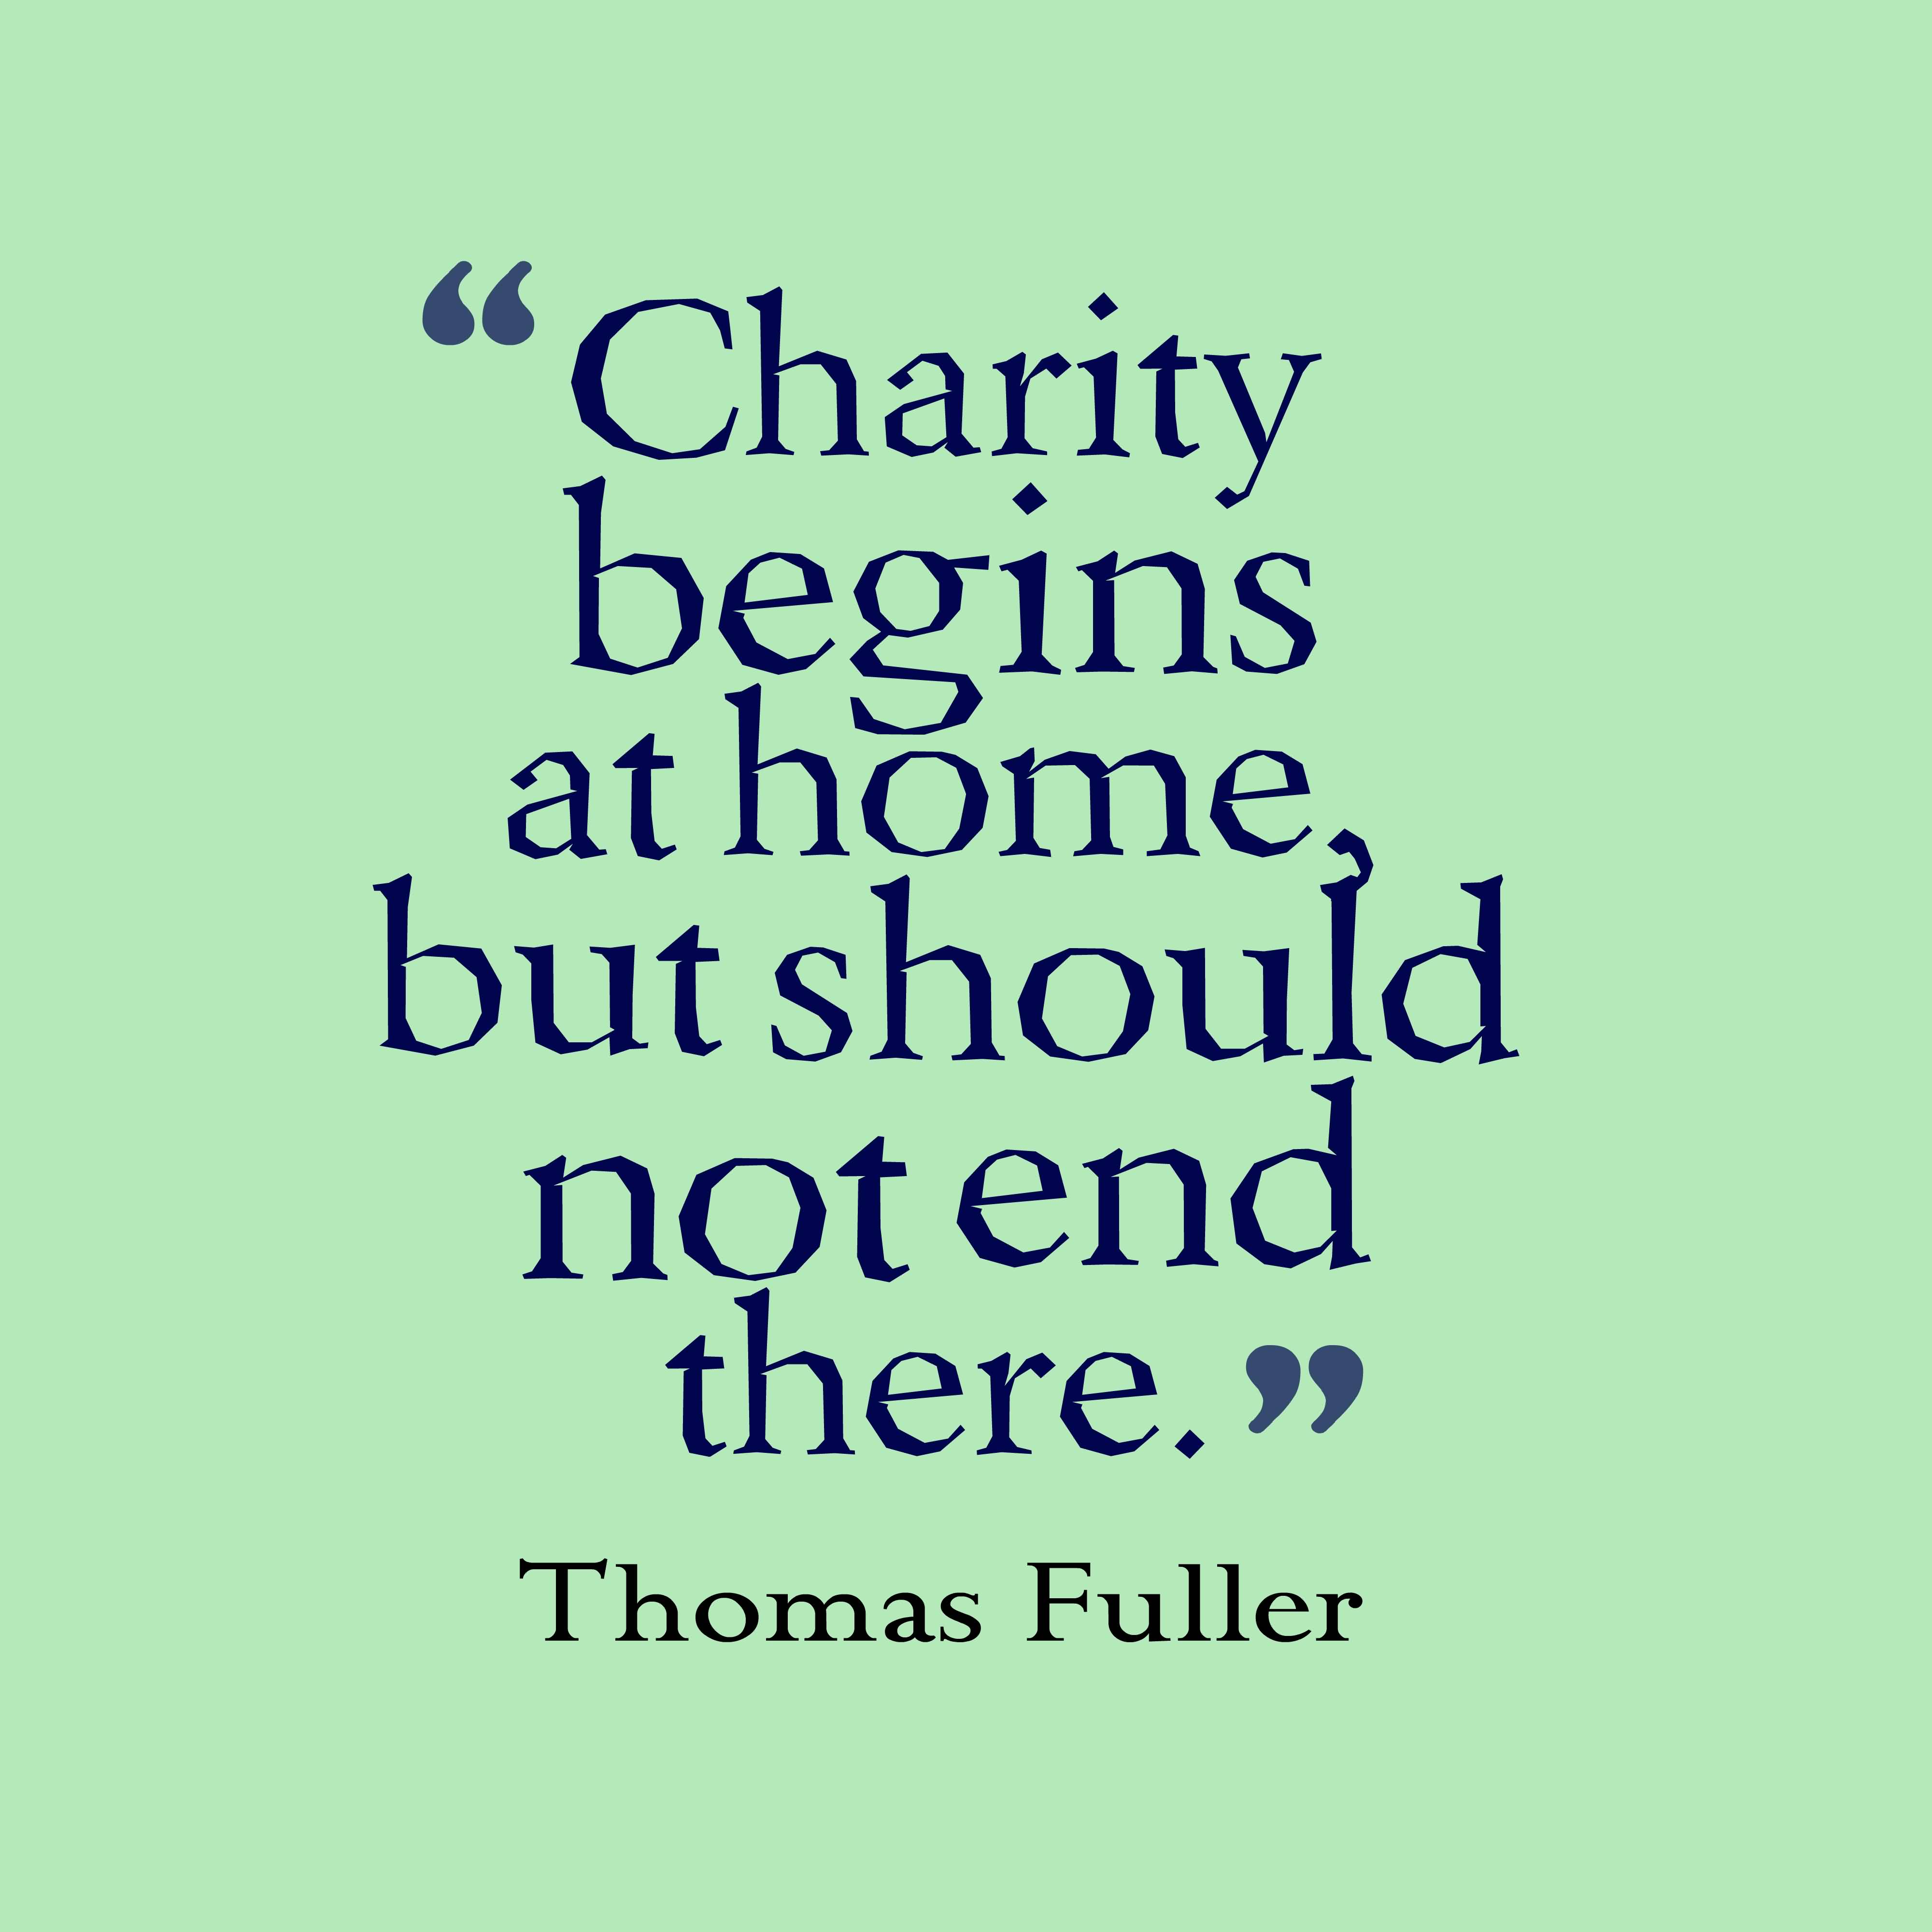 charity begins at home but should not end there. thomas fuller